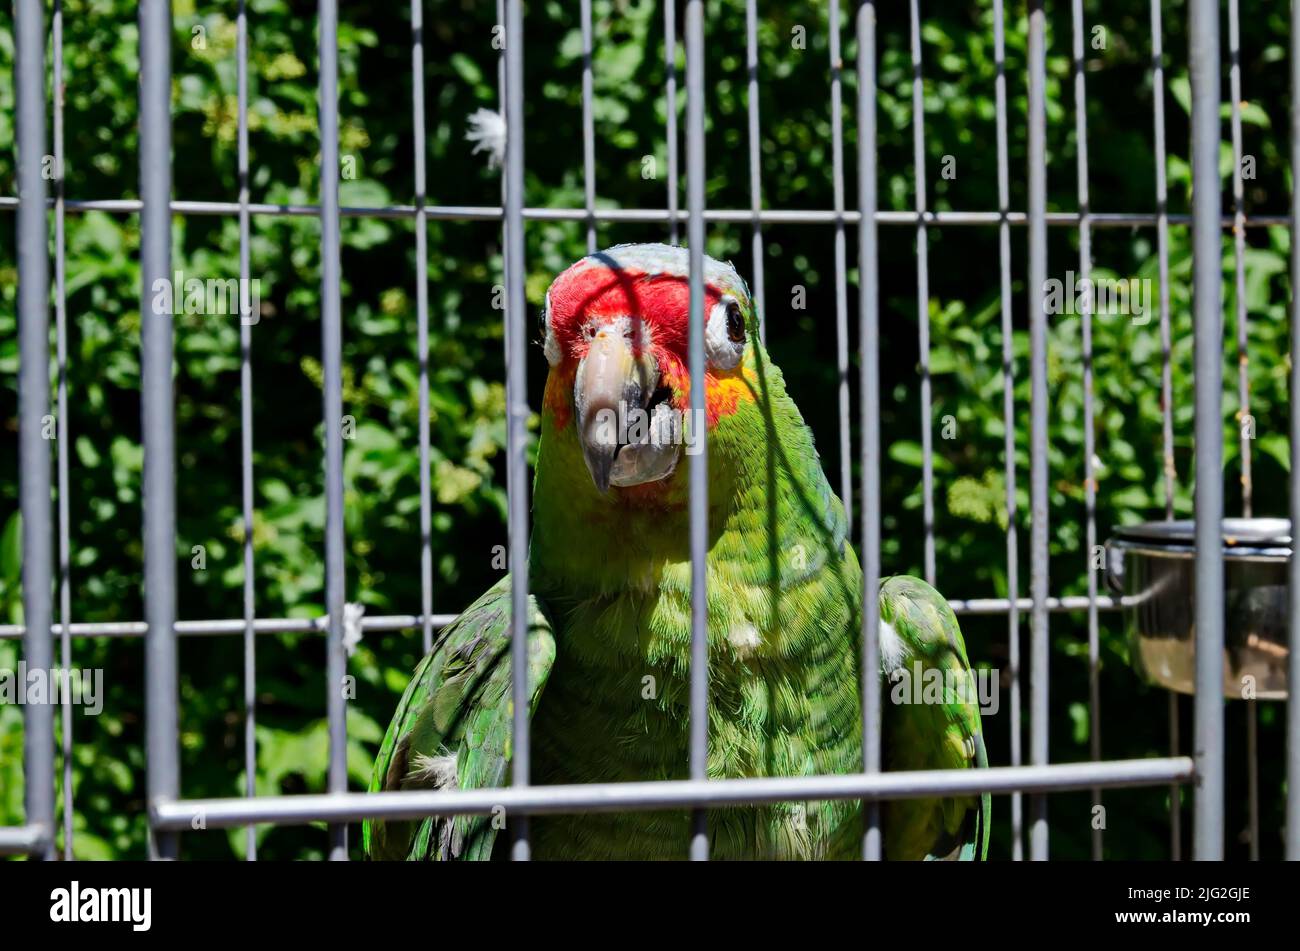 Macaw Scarlet or Macaw Ara is a large parrot with red, yellow and blue feathers relaxing in the cell, Sofia, Bulgaria Stock Photo